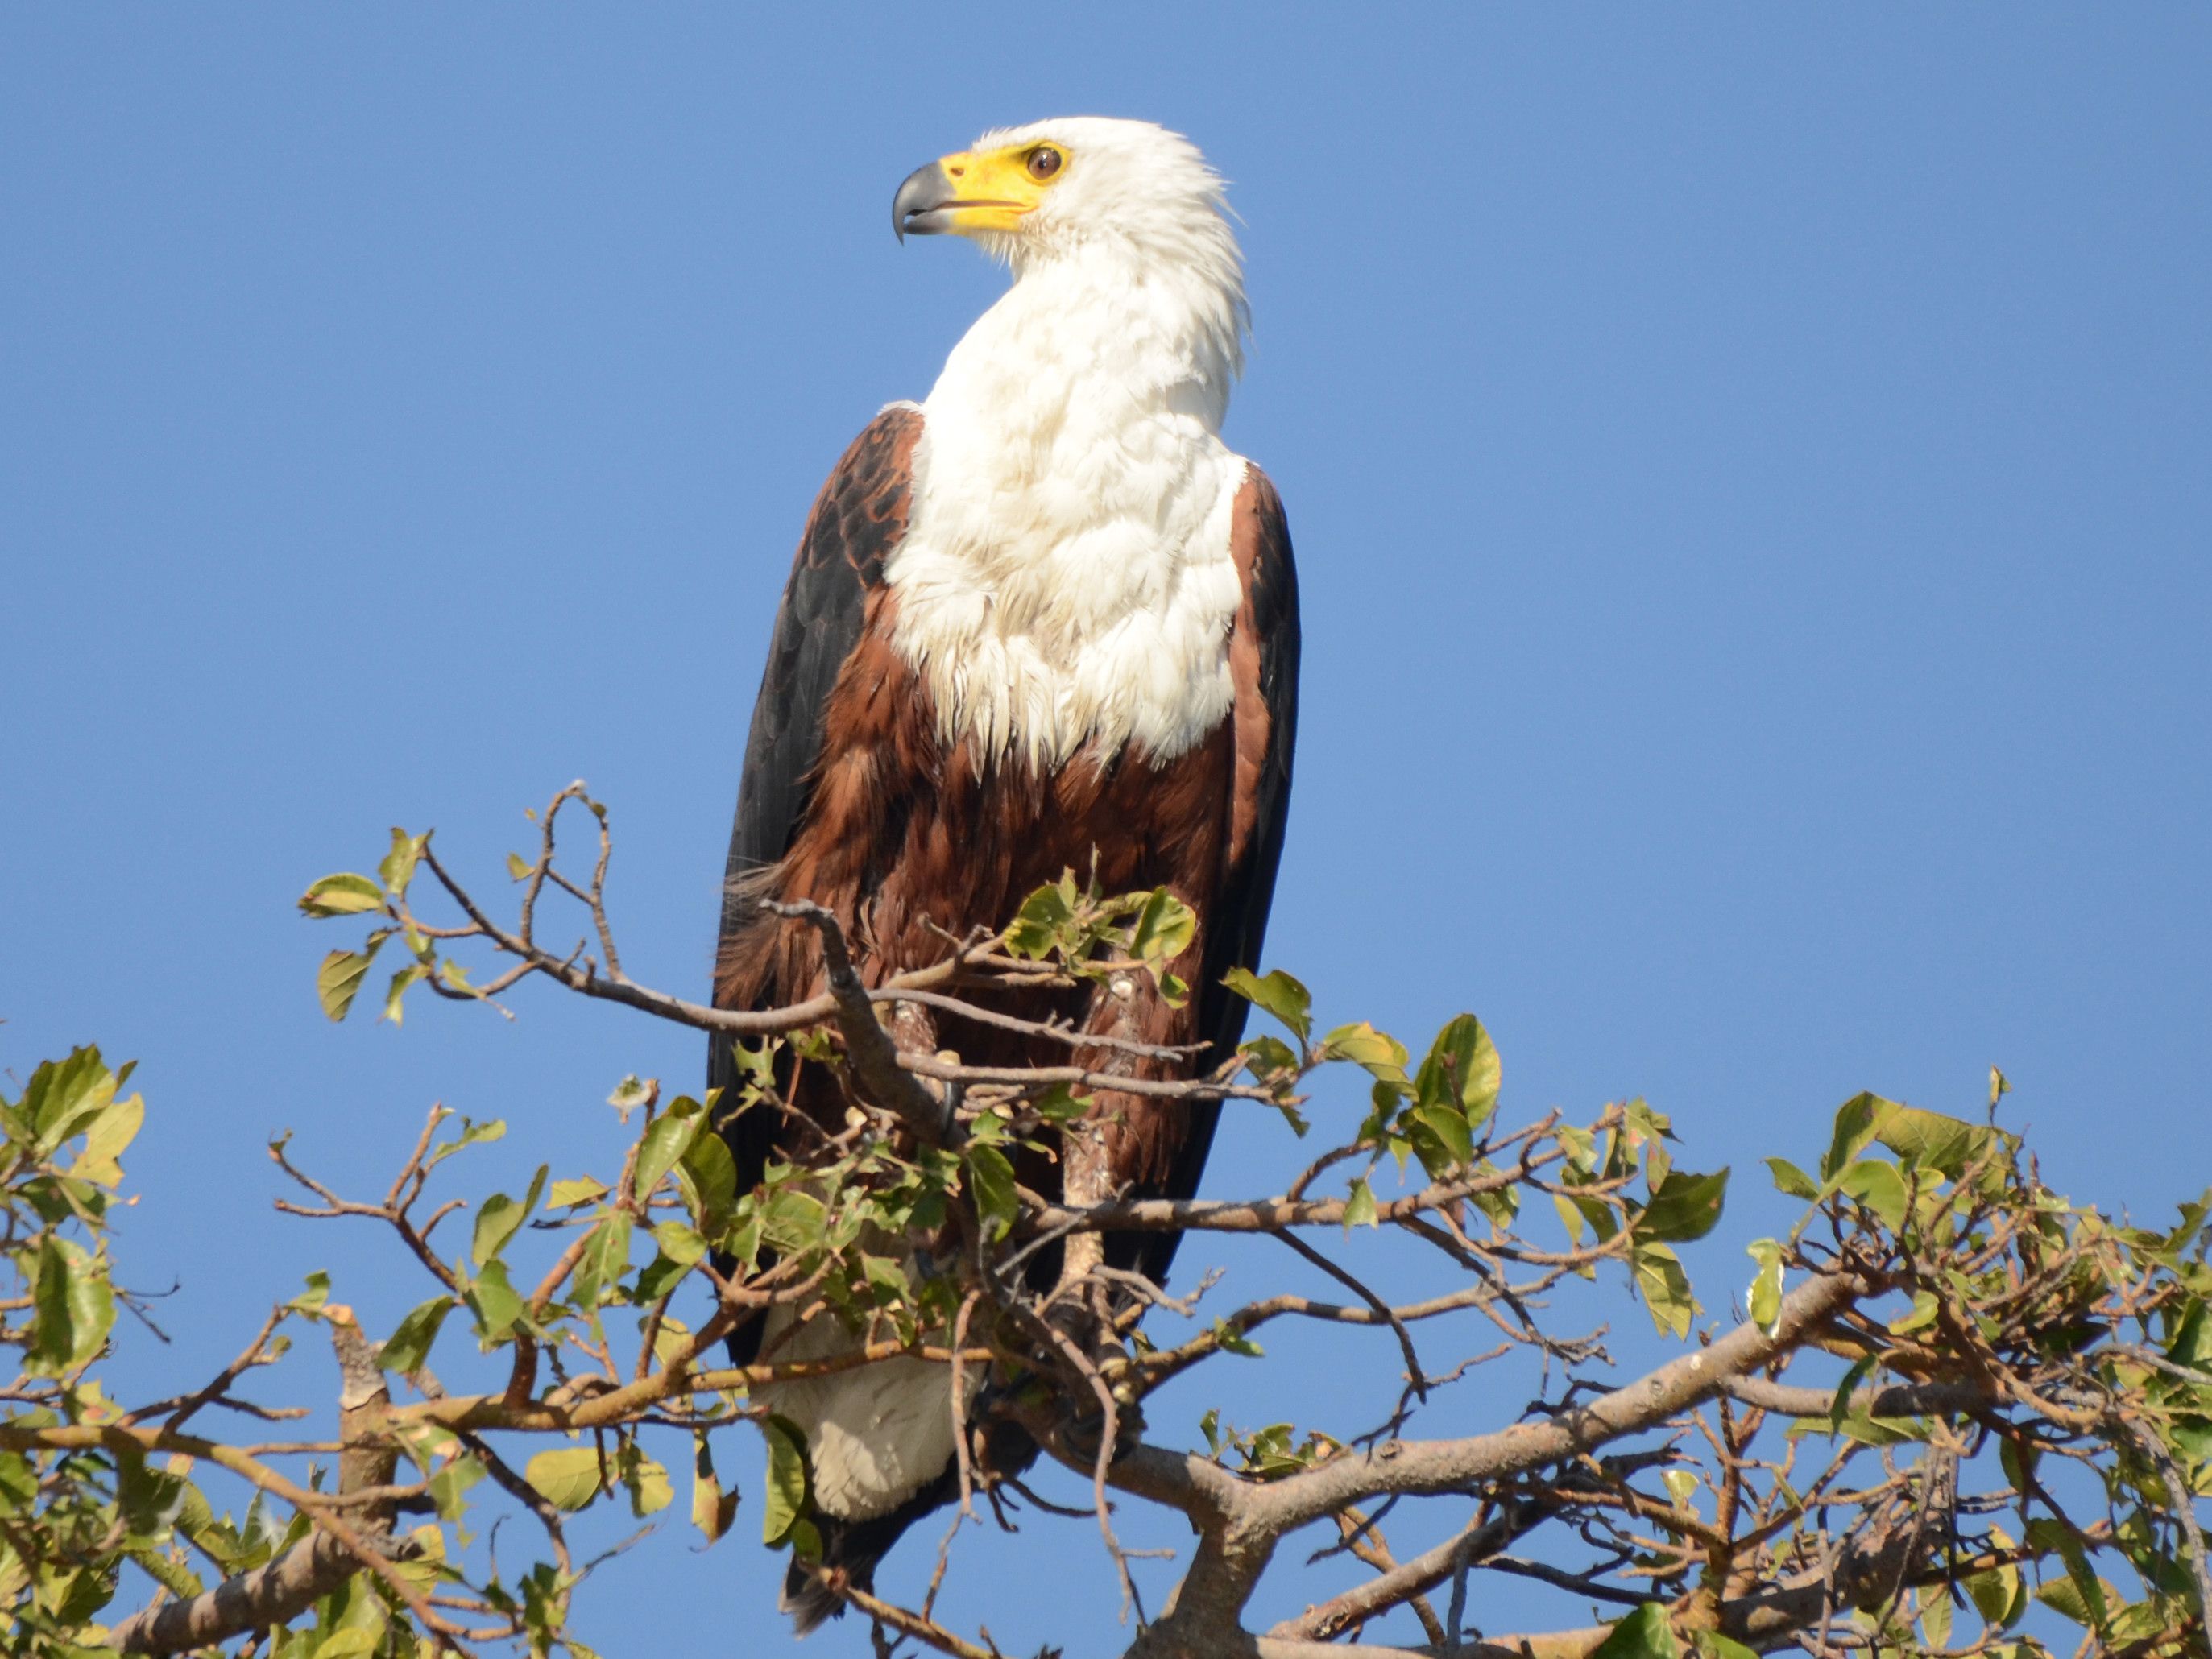 Click picture to see more African Fish-Eagles.